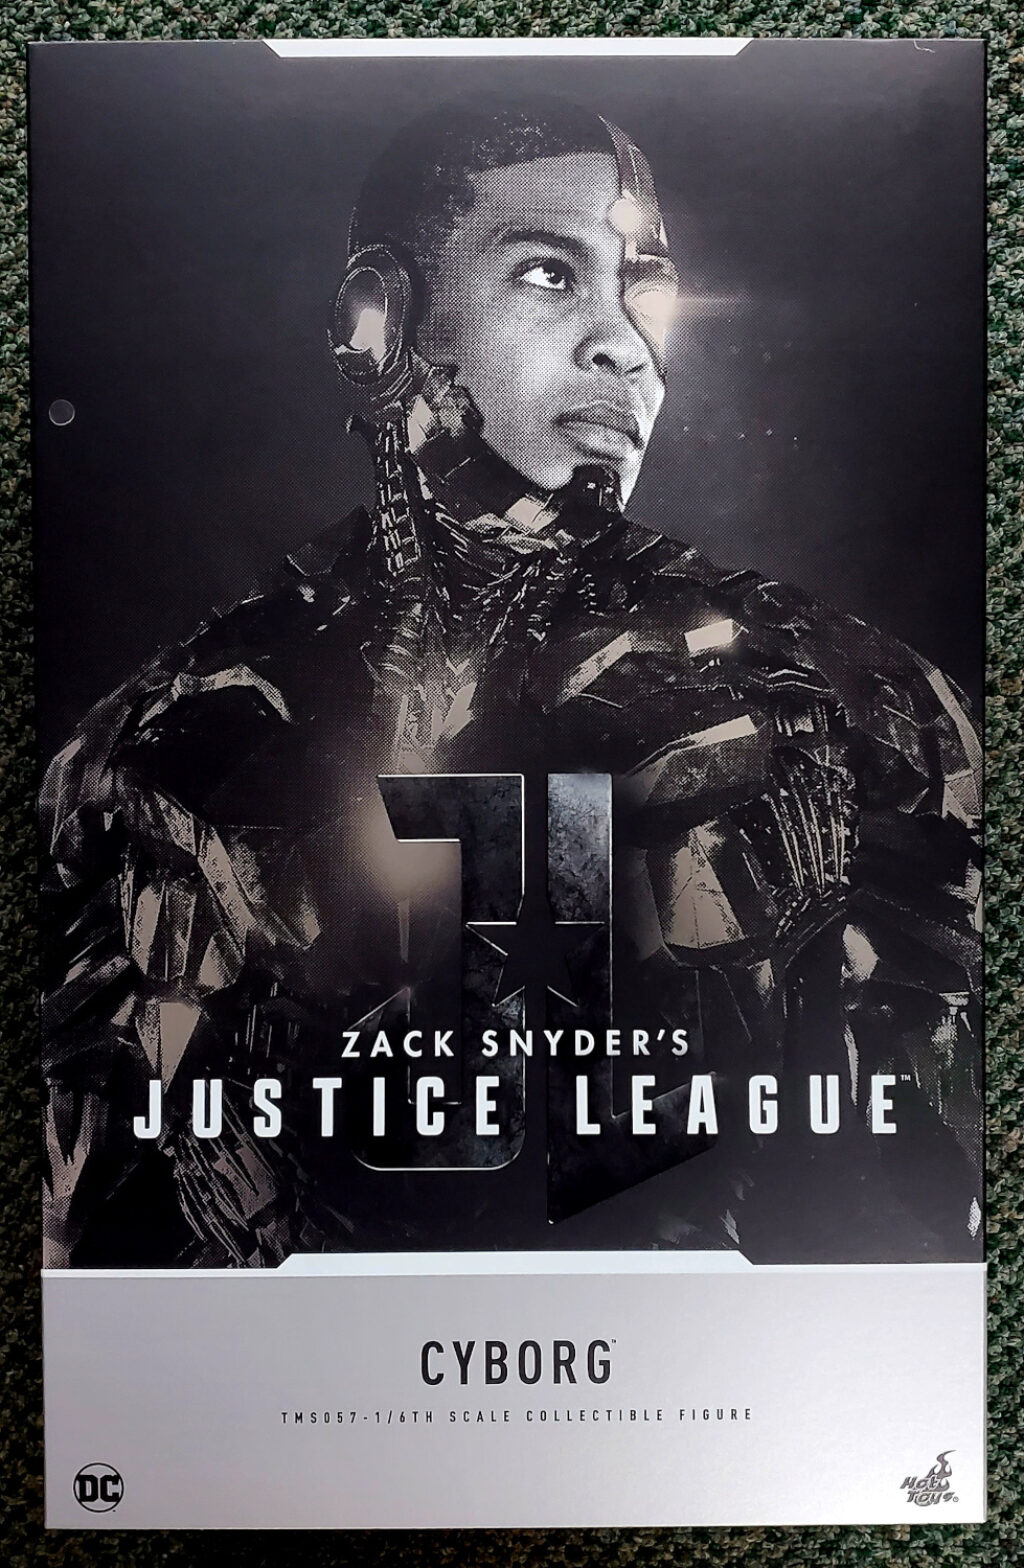 Hot Toys Zack Snyder's Justice League Cyborg 1:6 Scale Figure 1